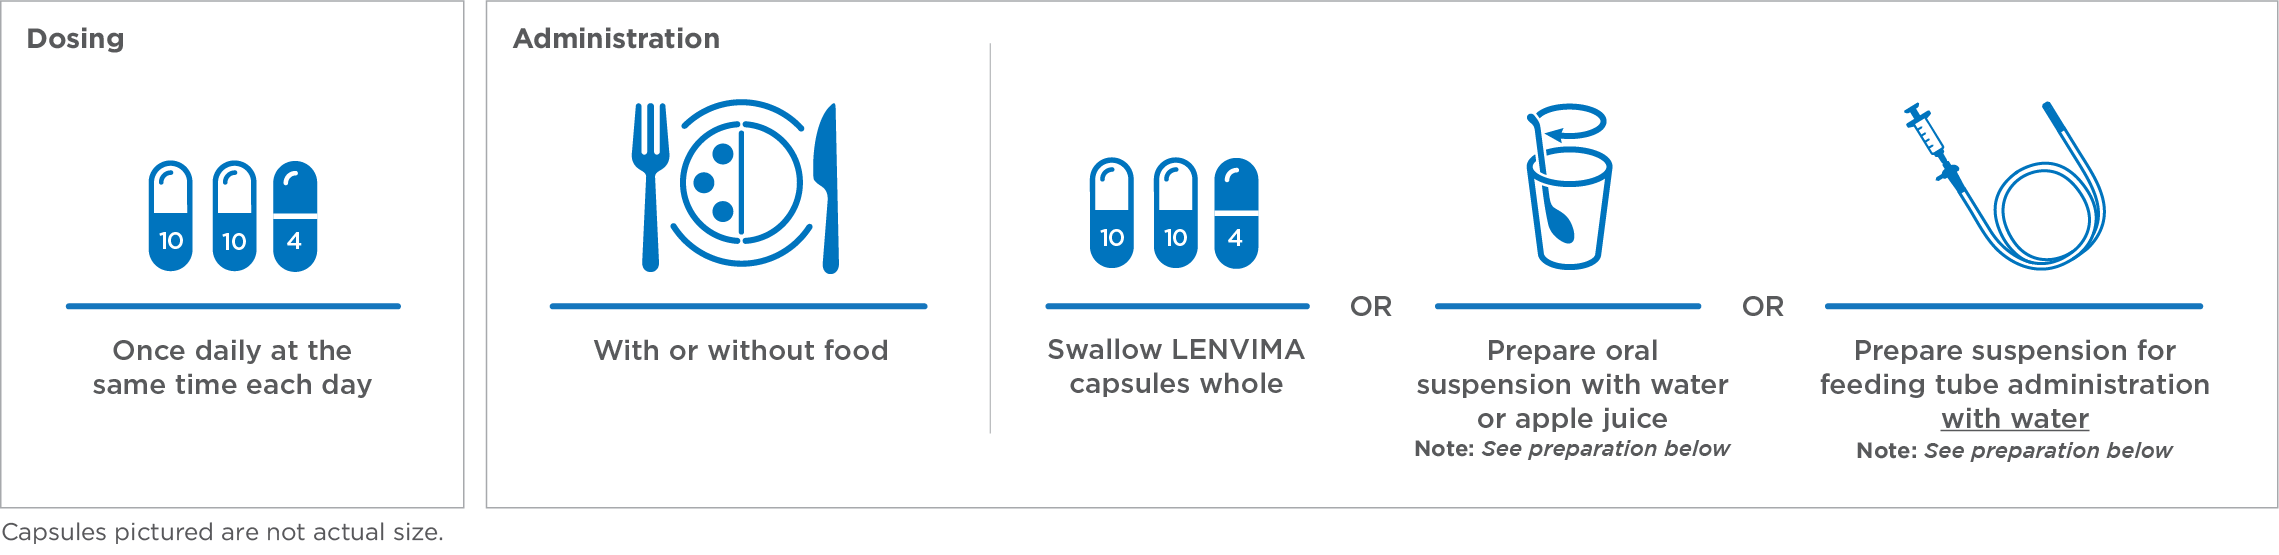 LENVIMA dosing for RAI-R differentiated thyroid cancer is once a day, every day, with or without food graphic.